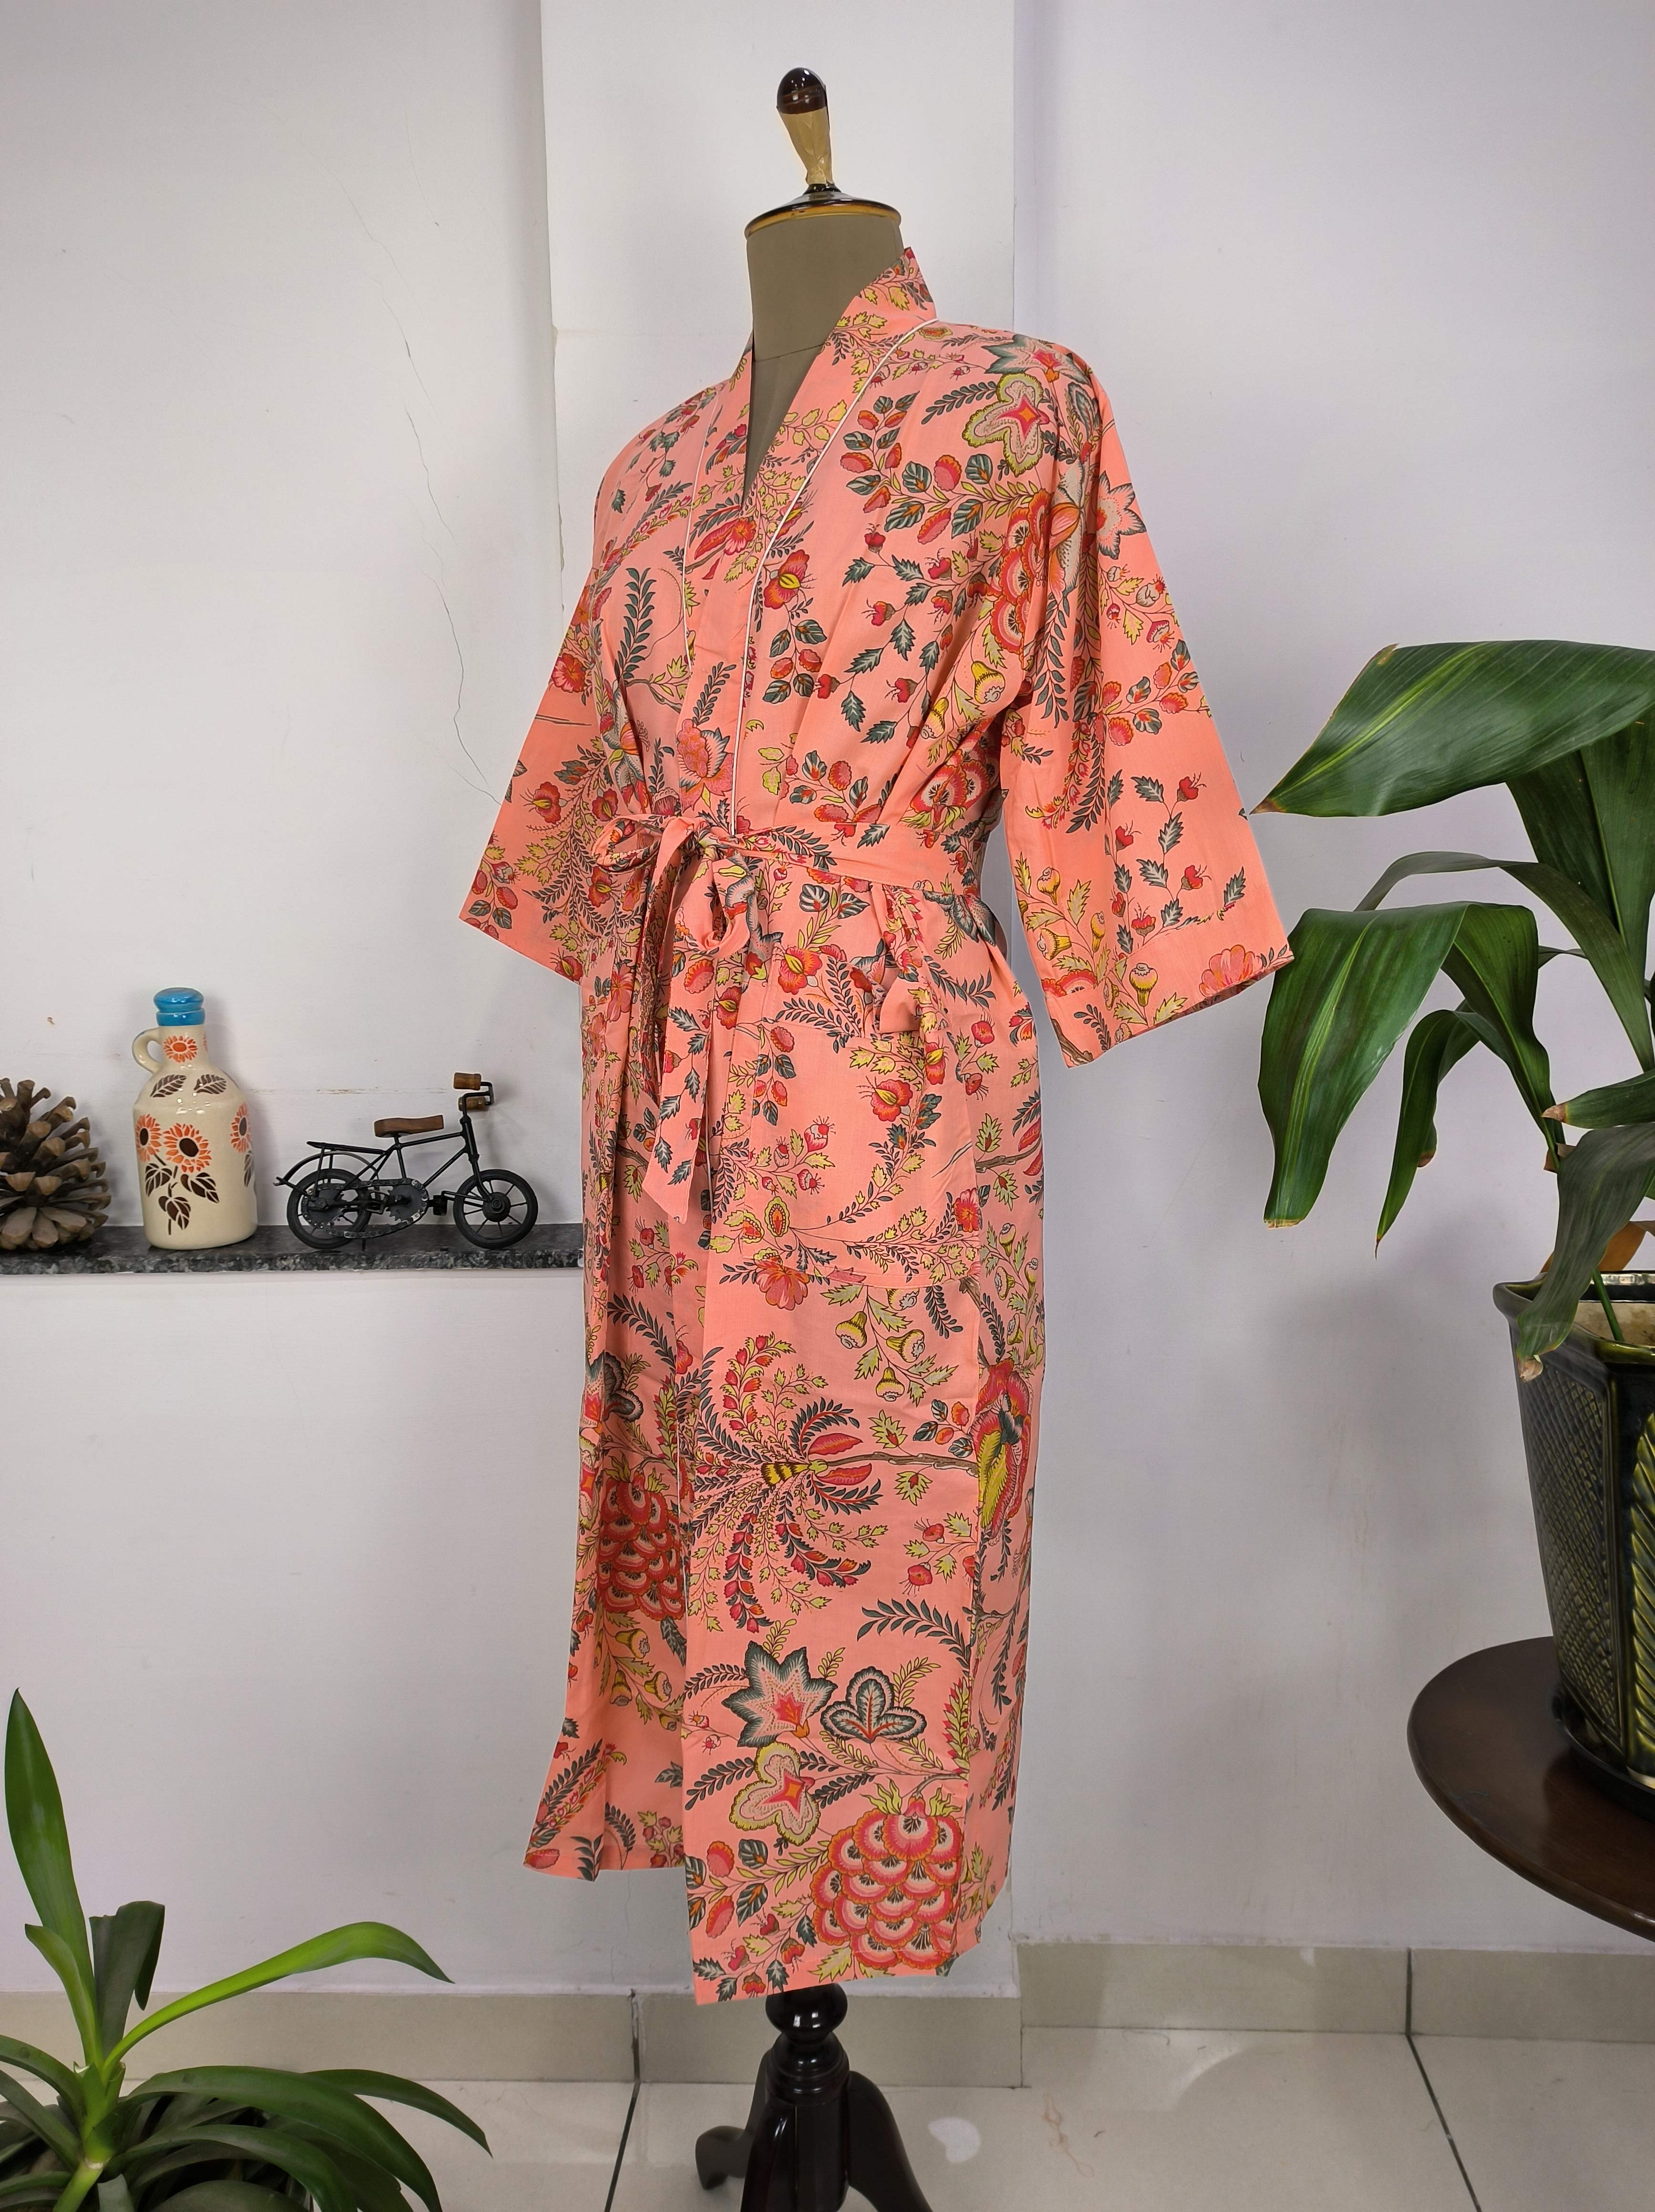 Pure Cotton Kimono Indian Handprinted Boho House Robe Summer Dress | Peach Red Floral Beach Cover Up Wear | Christmas Present, Gift For Her